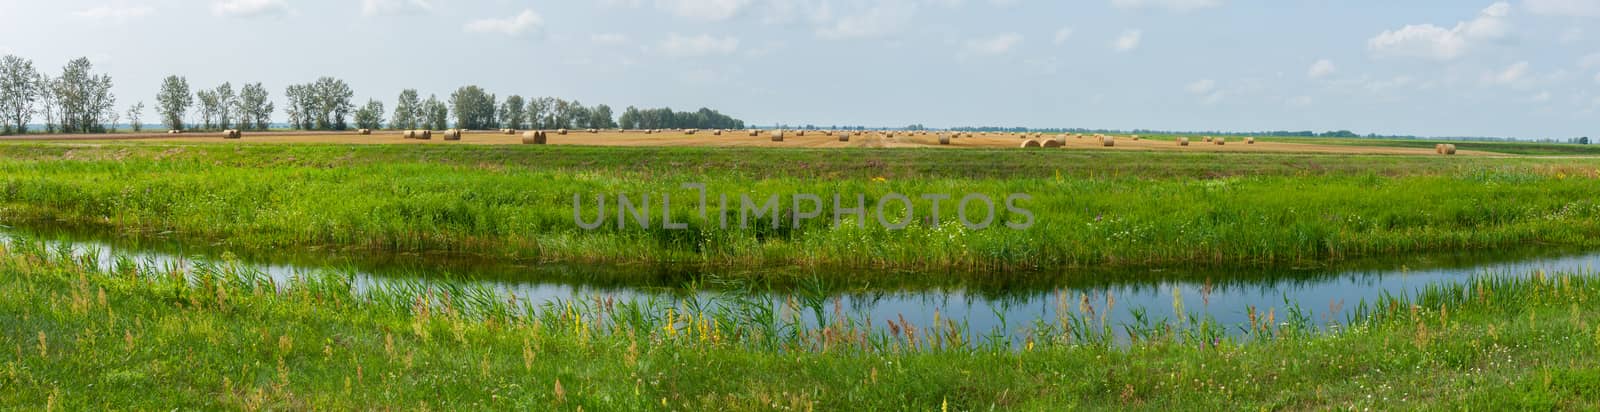 A small river channel against a background of green grass and a golden field with haystacks in the distance by Adamchuk